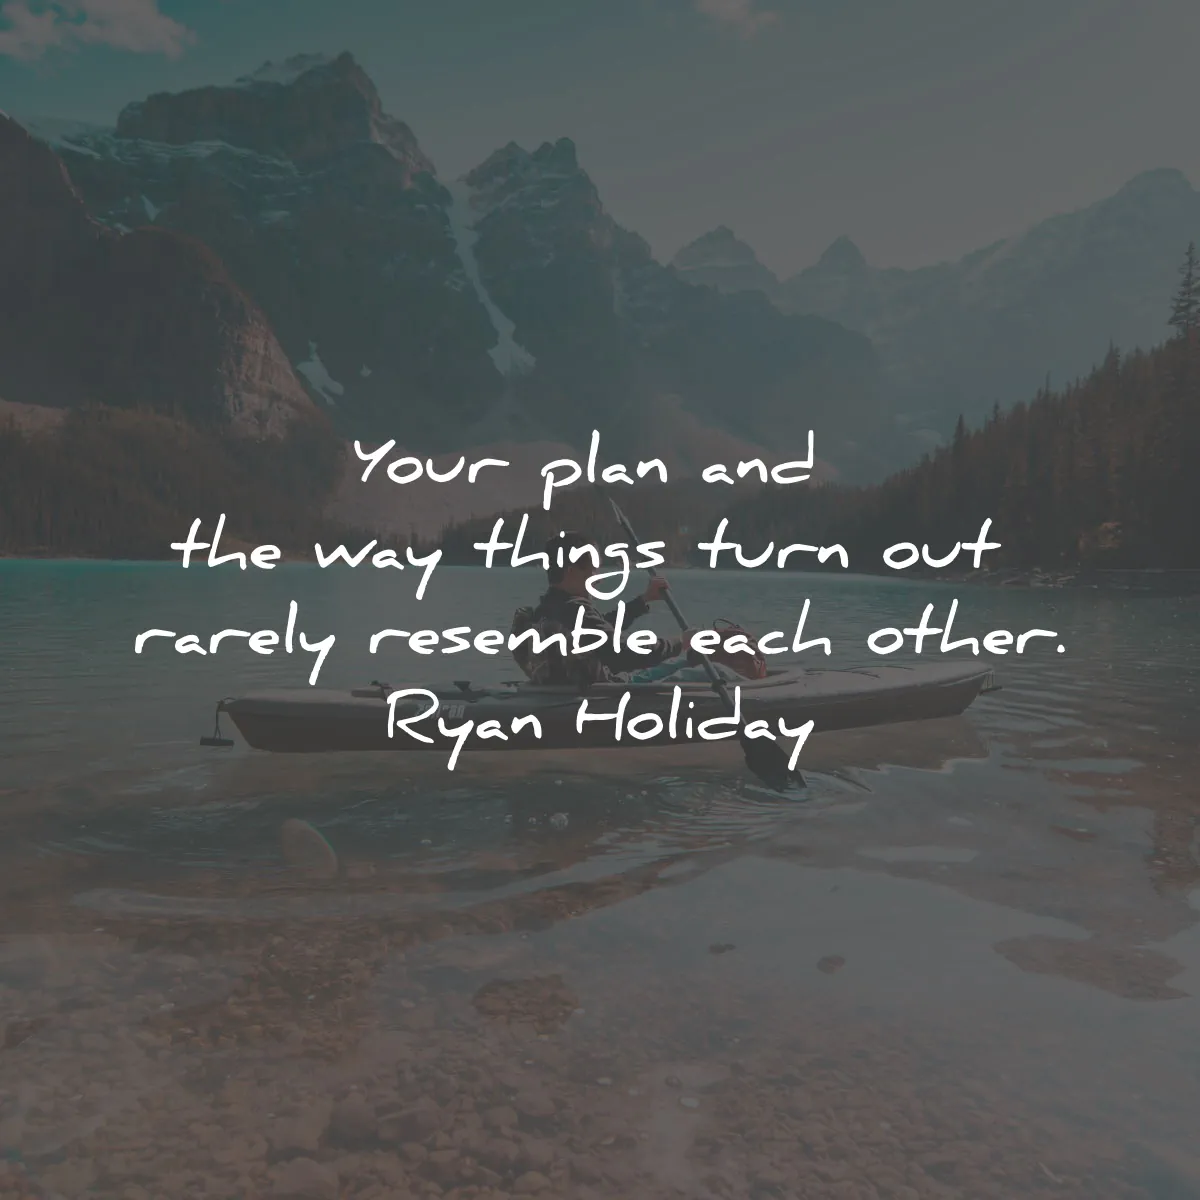 the obstacle is the way quotes summary ryan holiday plan things turn out resemble other wisdom